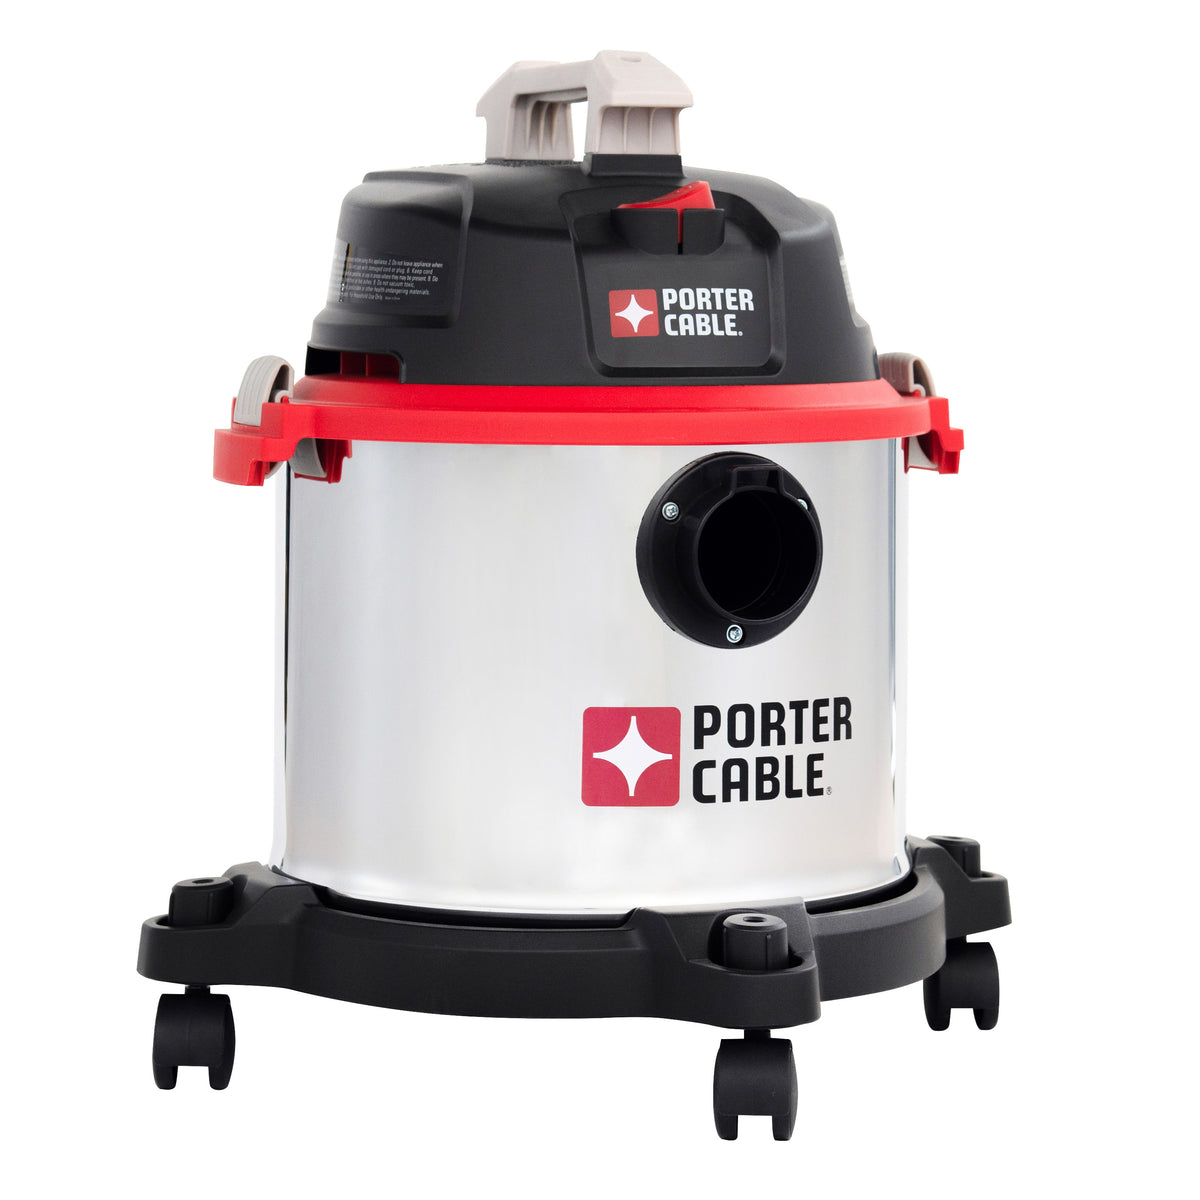 PCX18406-5B Porter-Cable 5 Gallon, 4 HP Stainless Steel Wet/Dry Vacuum